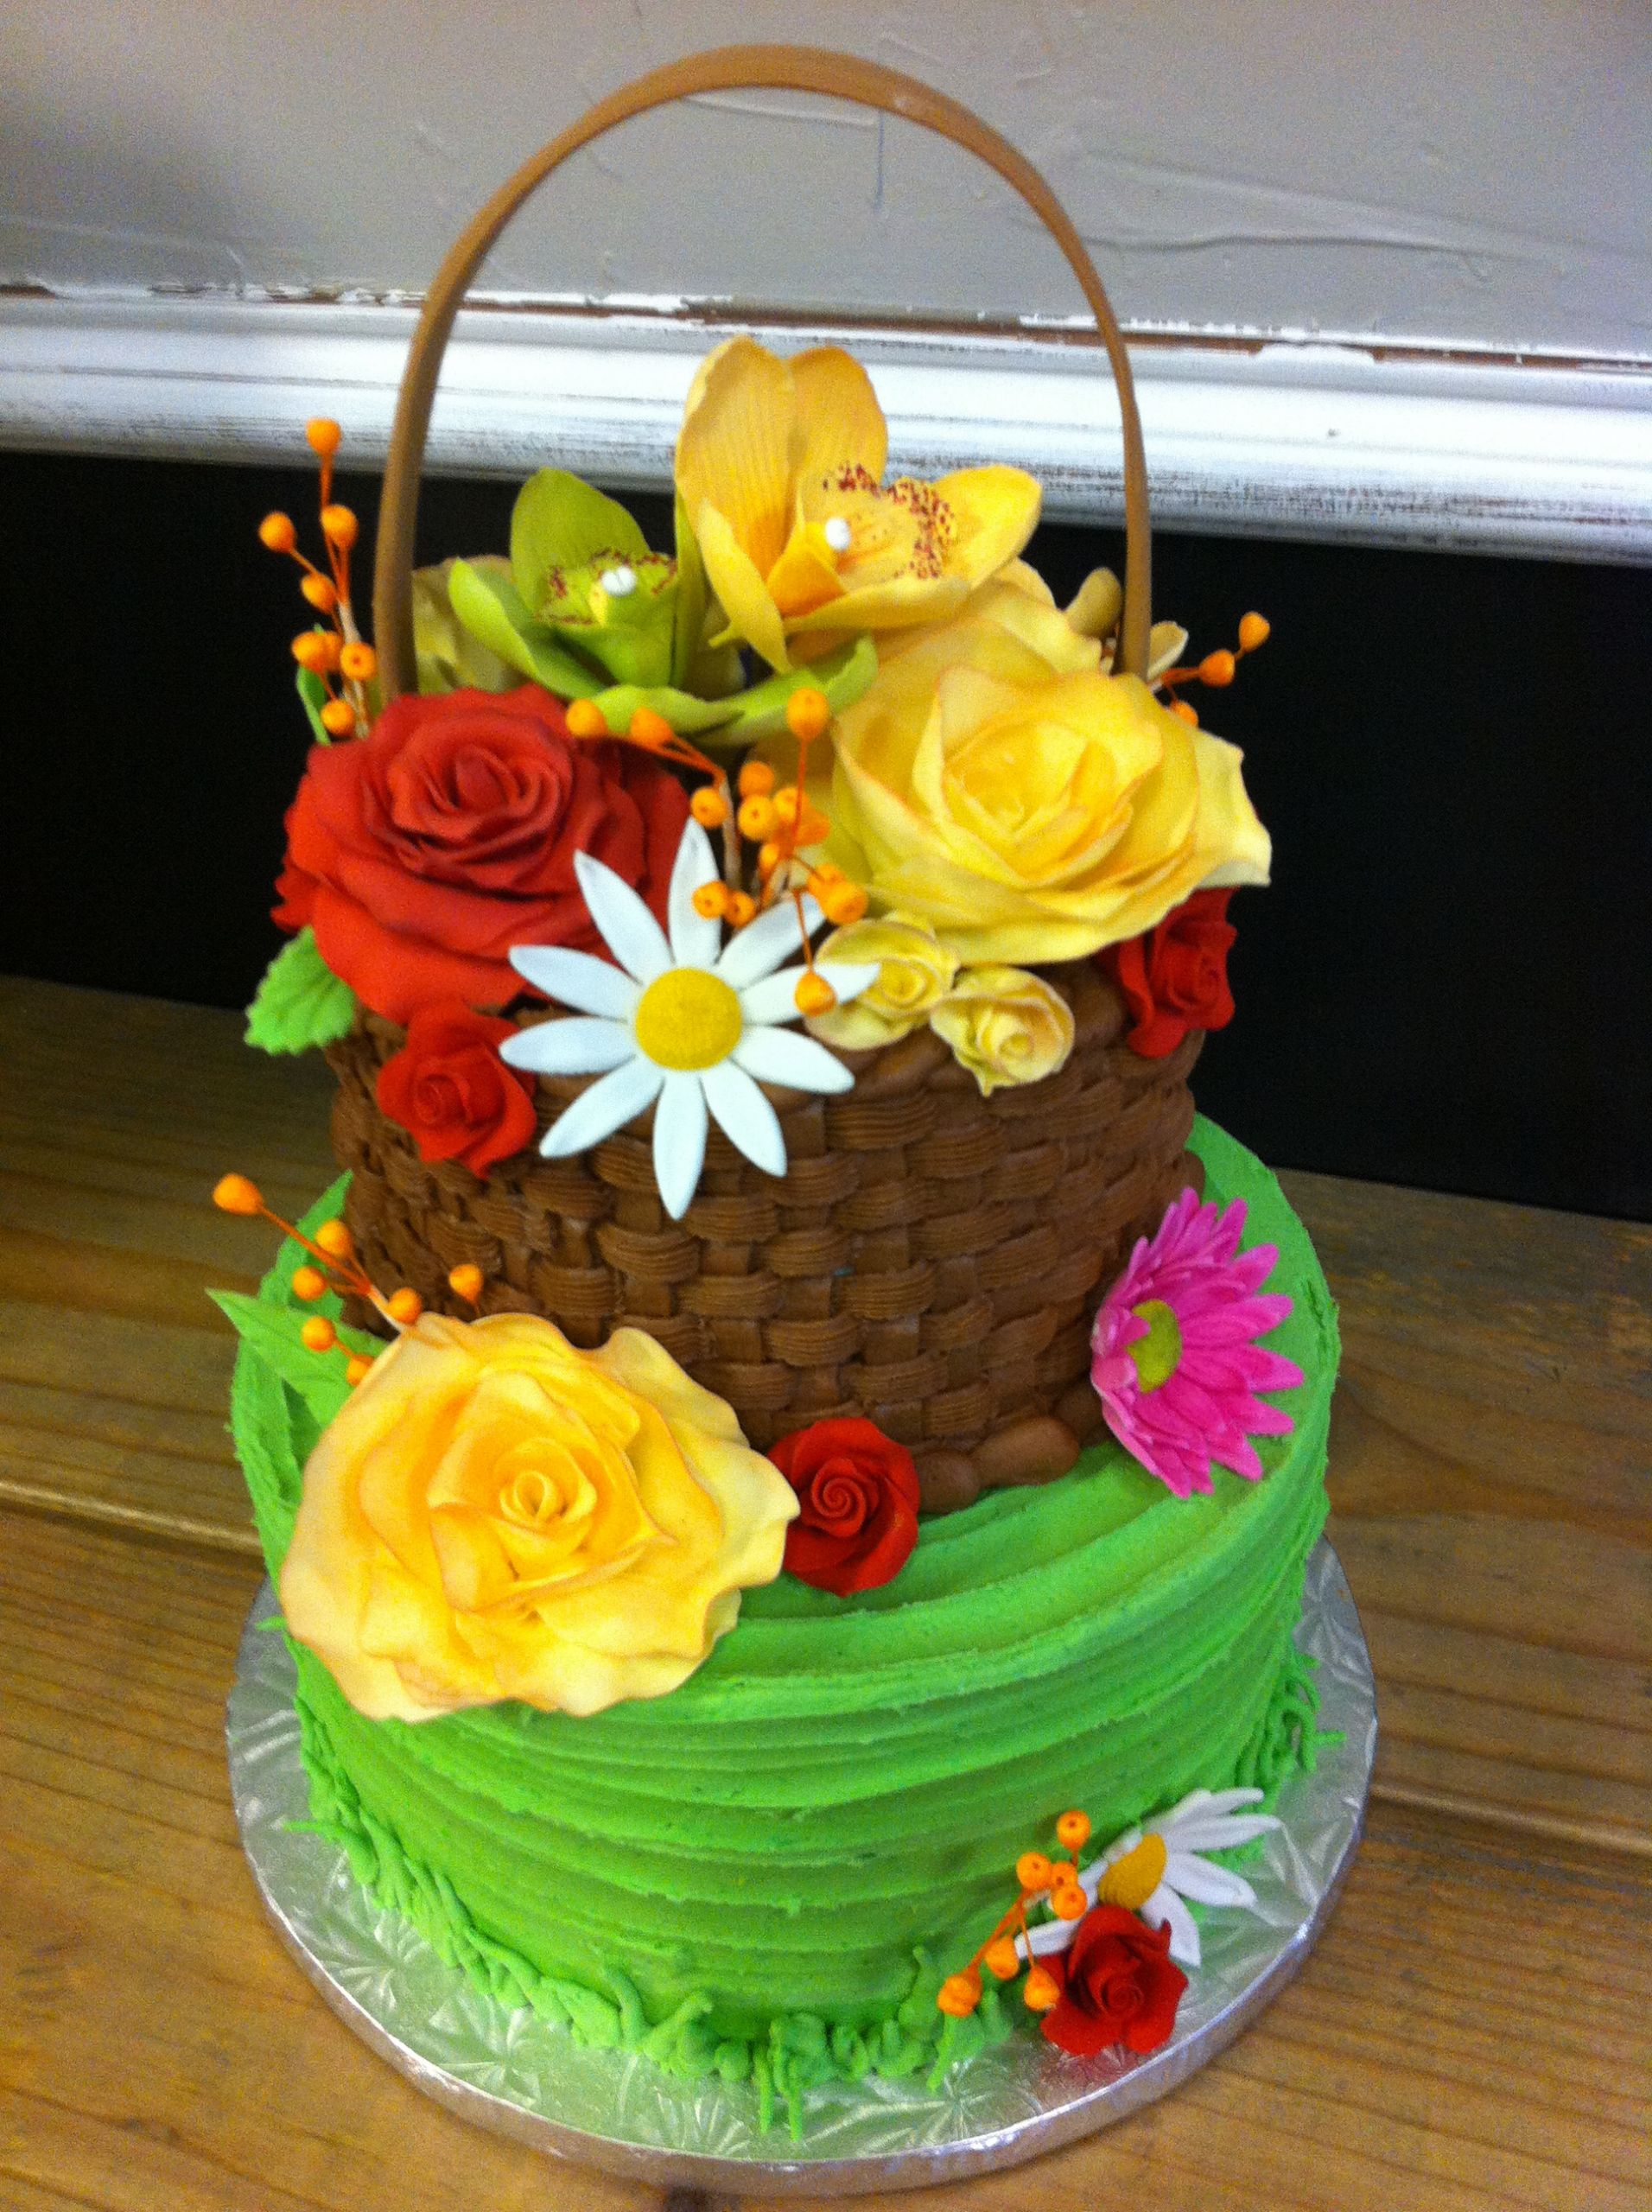 Flower Birthday Cakes
 Party cakes in McKinney and Dallas Texas